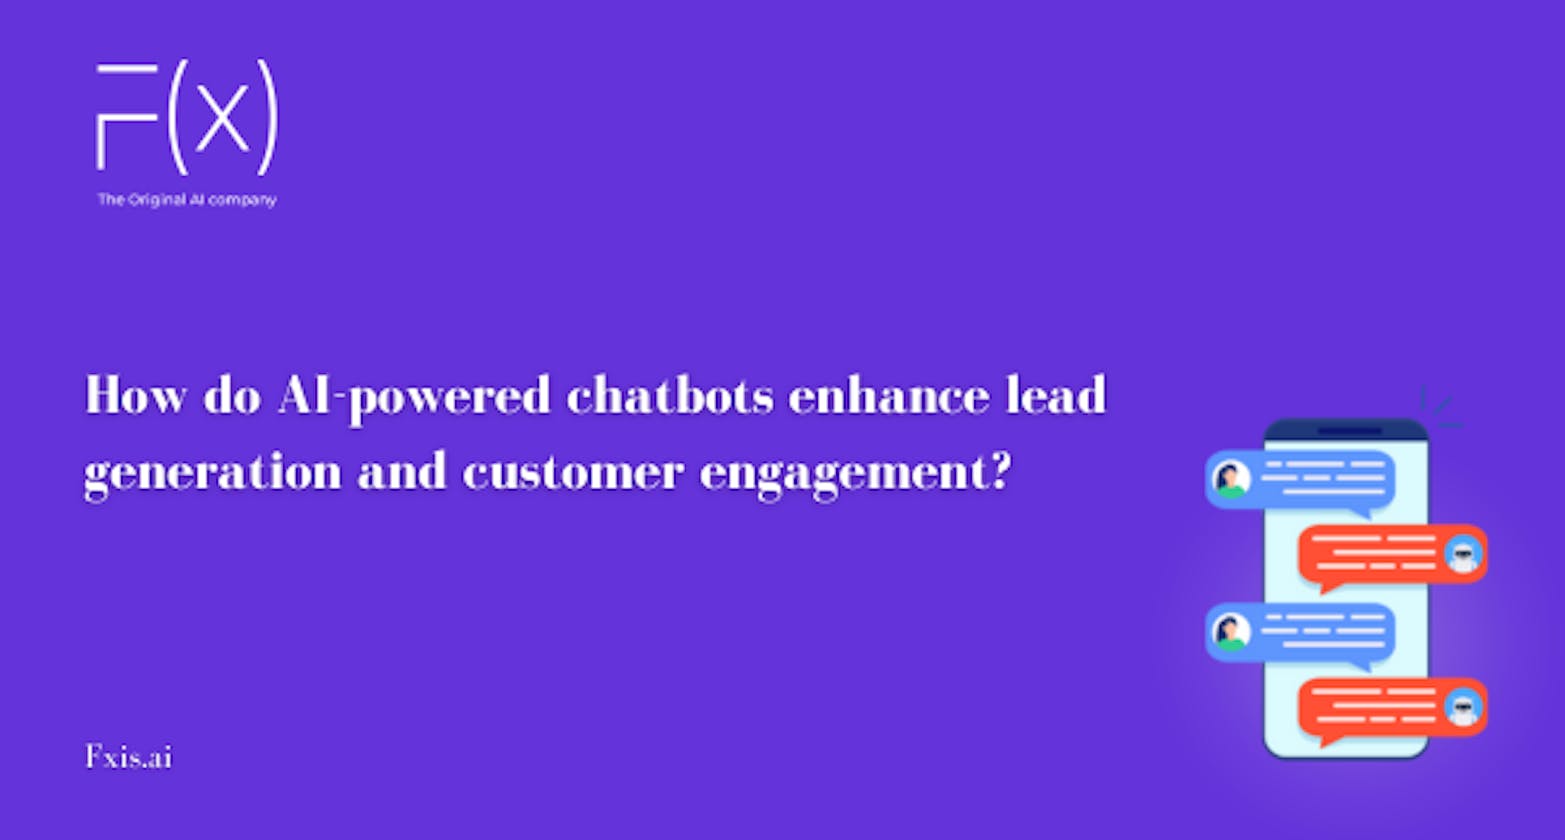 How do AI-powered chatbots enhance lead generation and customer engagement?